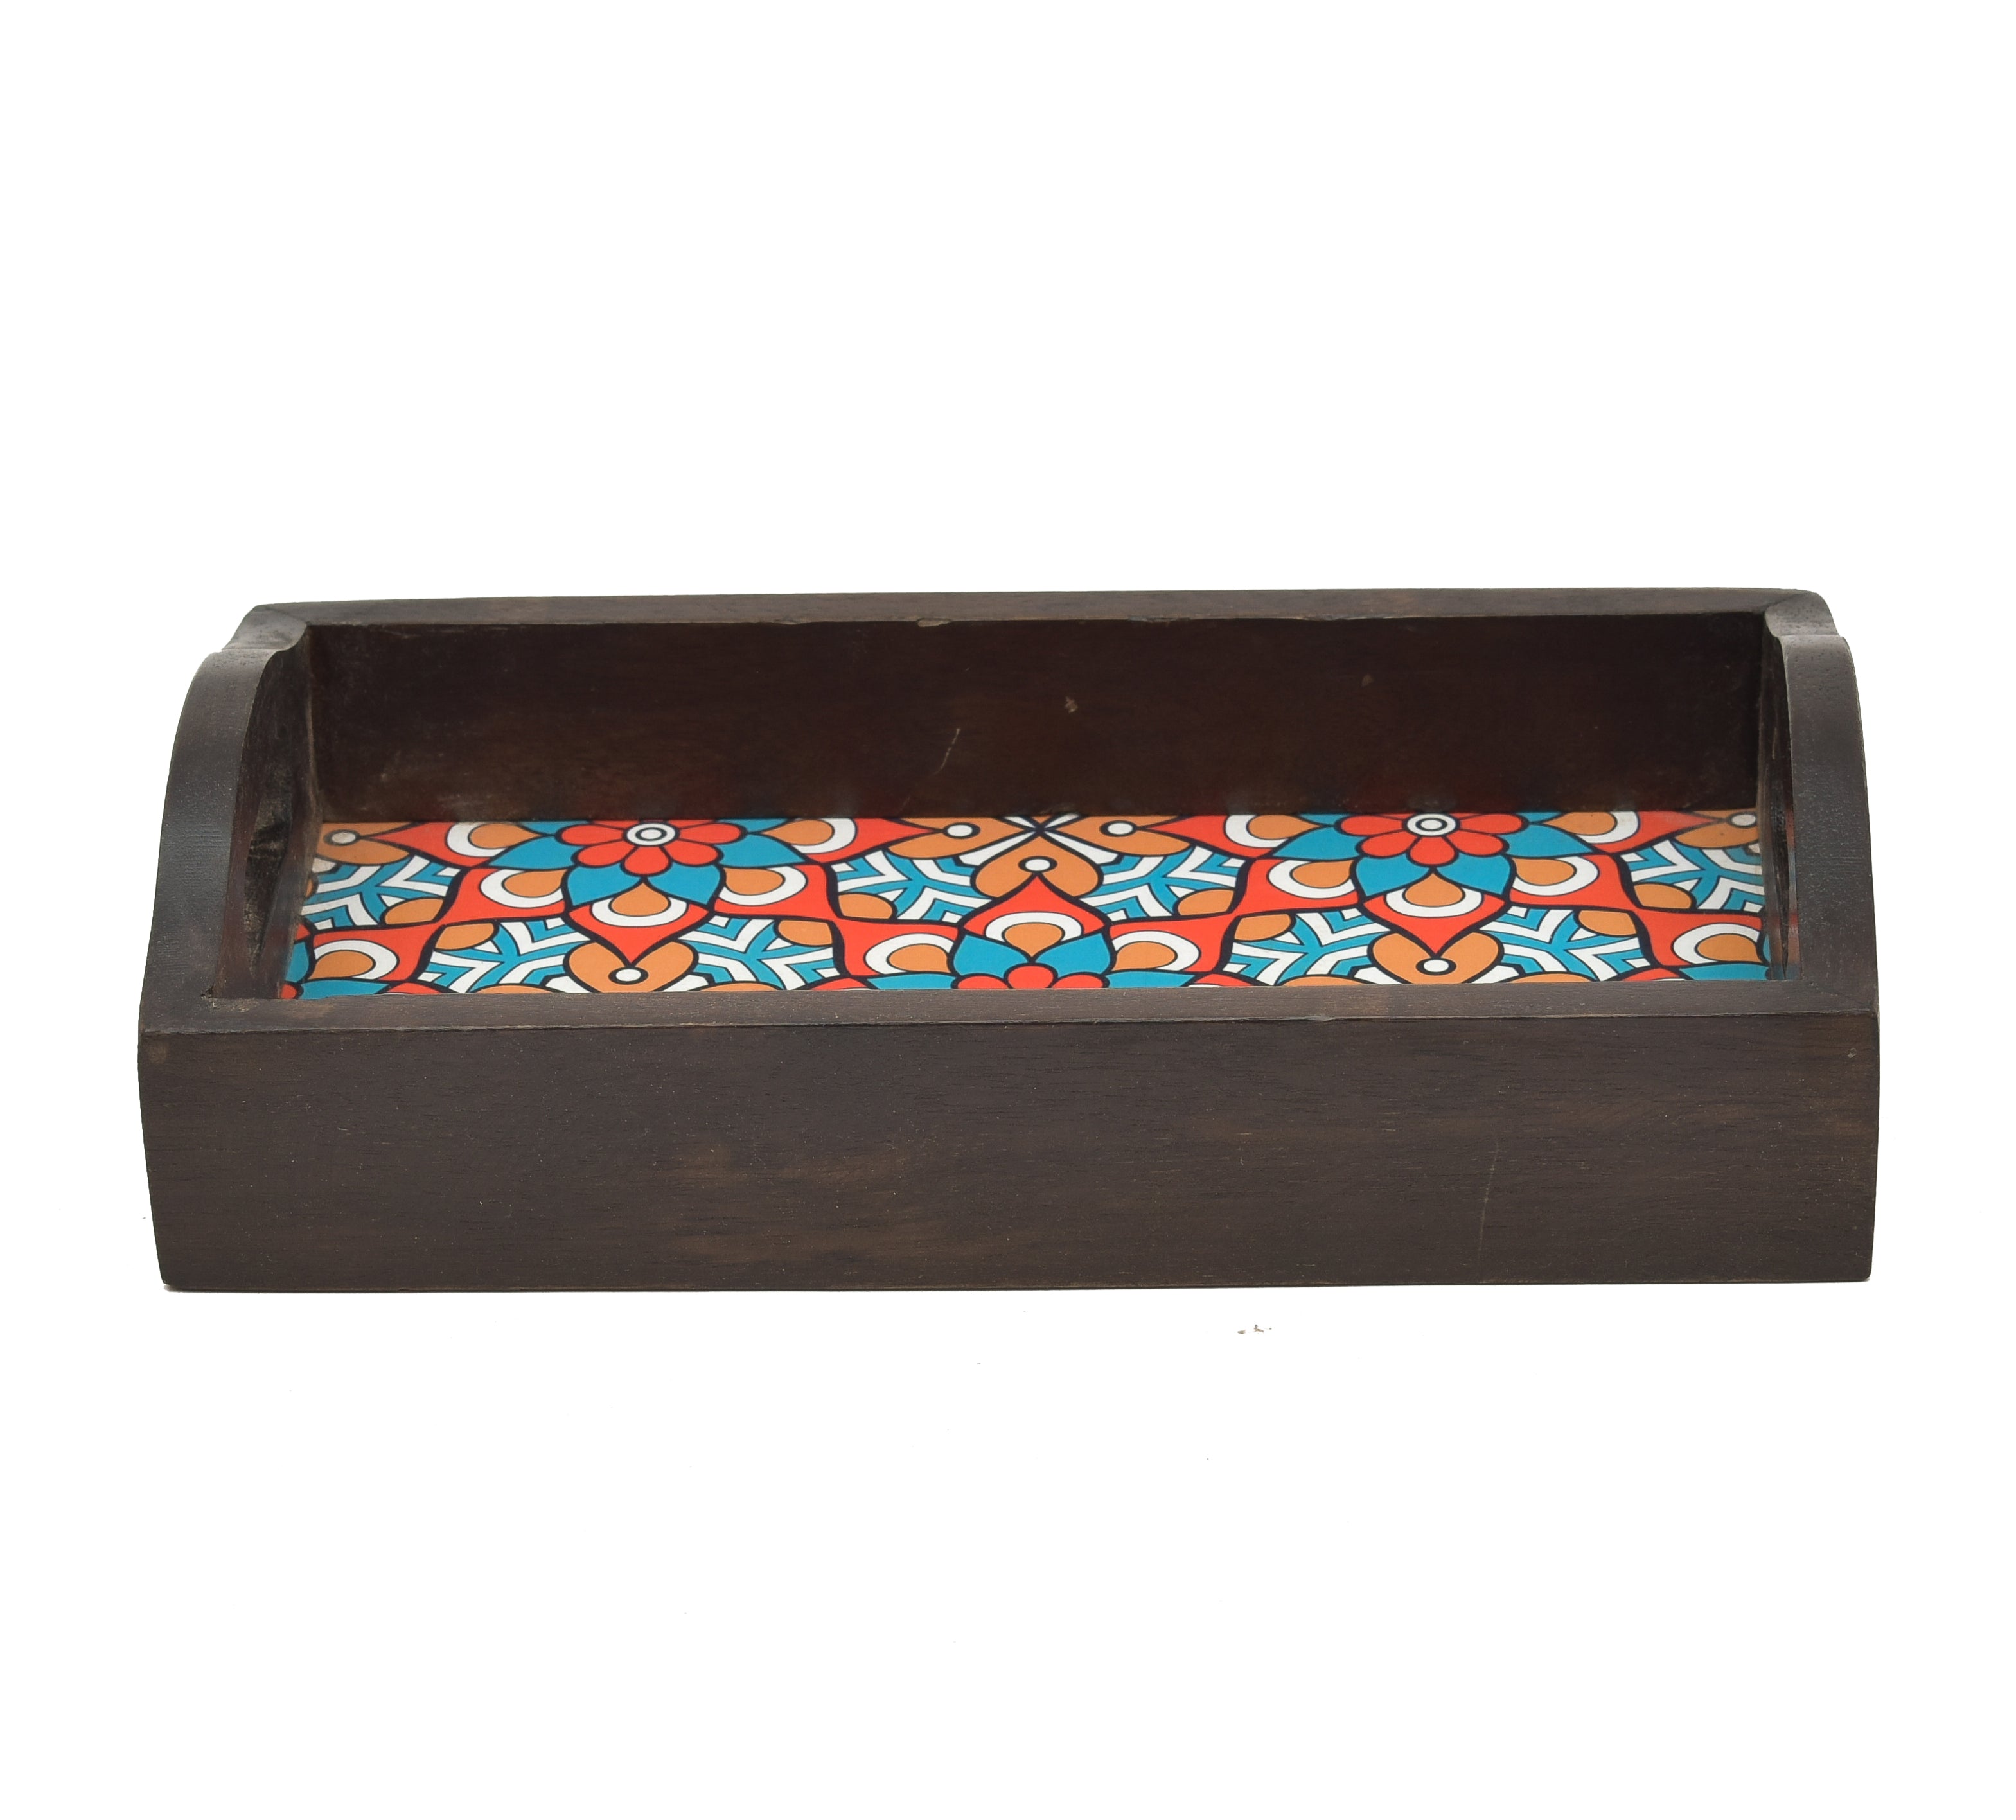 BLUE FLORAL PRINTED WOODEN BROWN RECTANGLE SERVING TRAY